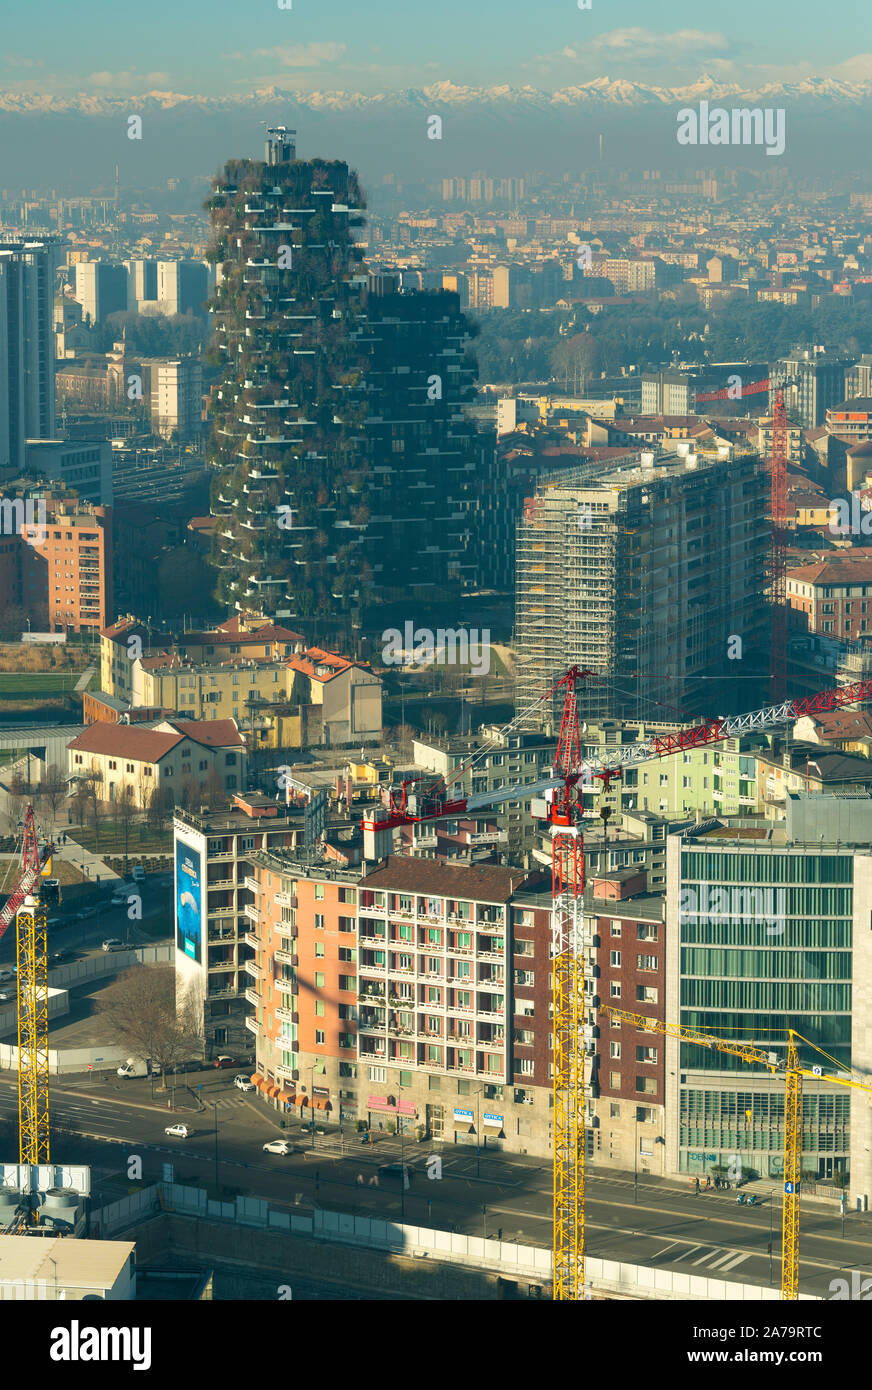 Milan skyline, aerial view of Bosco Verticale (Vertical forest) skyscrapers and the city covered by smog. Italian landscape. Stock Photo